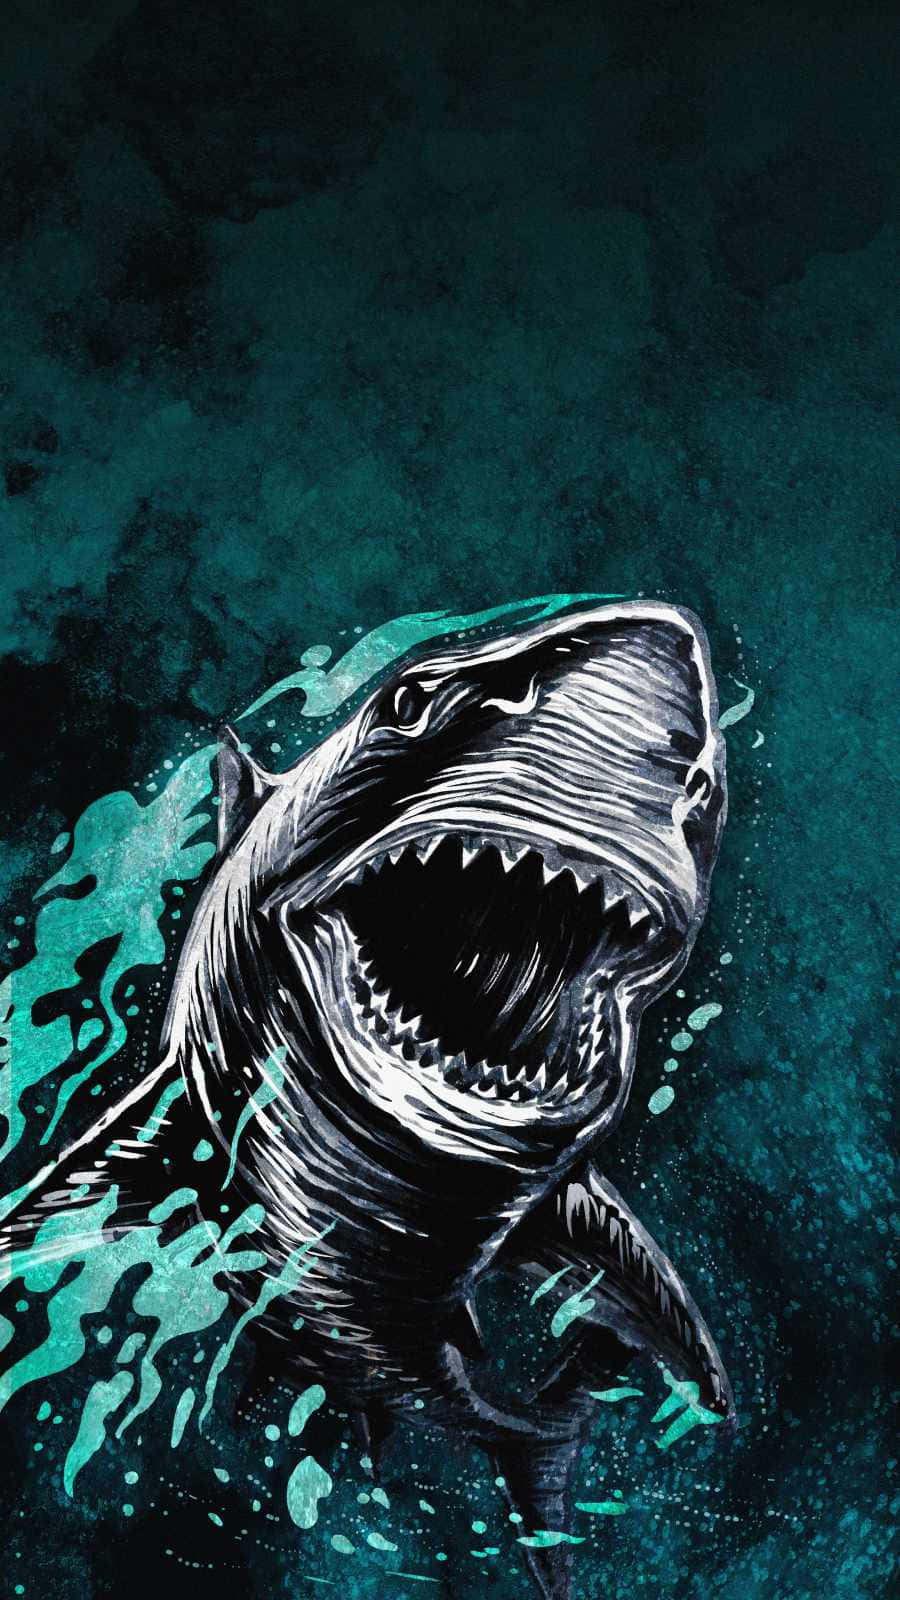 Get The Coolest Look With Cool Shark Wallpaper